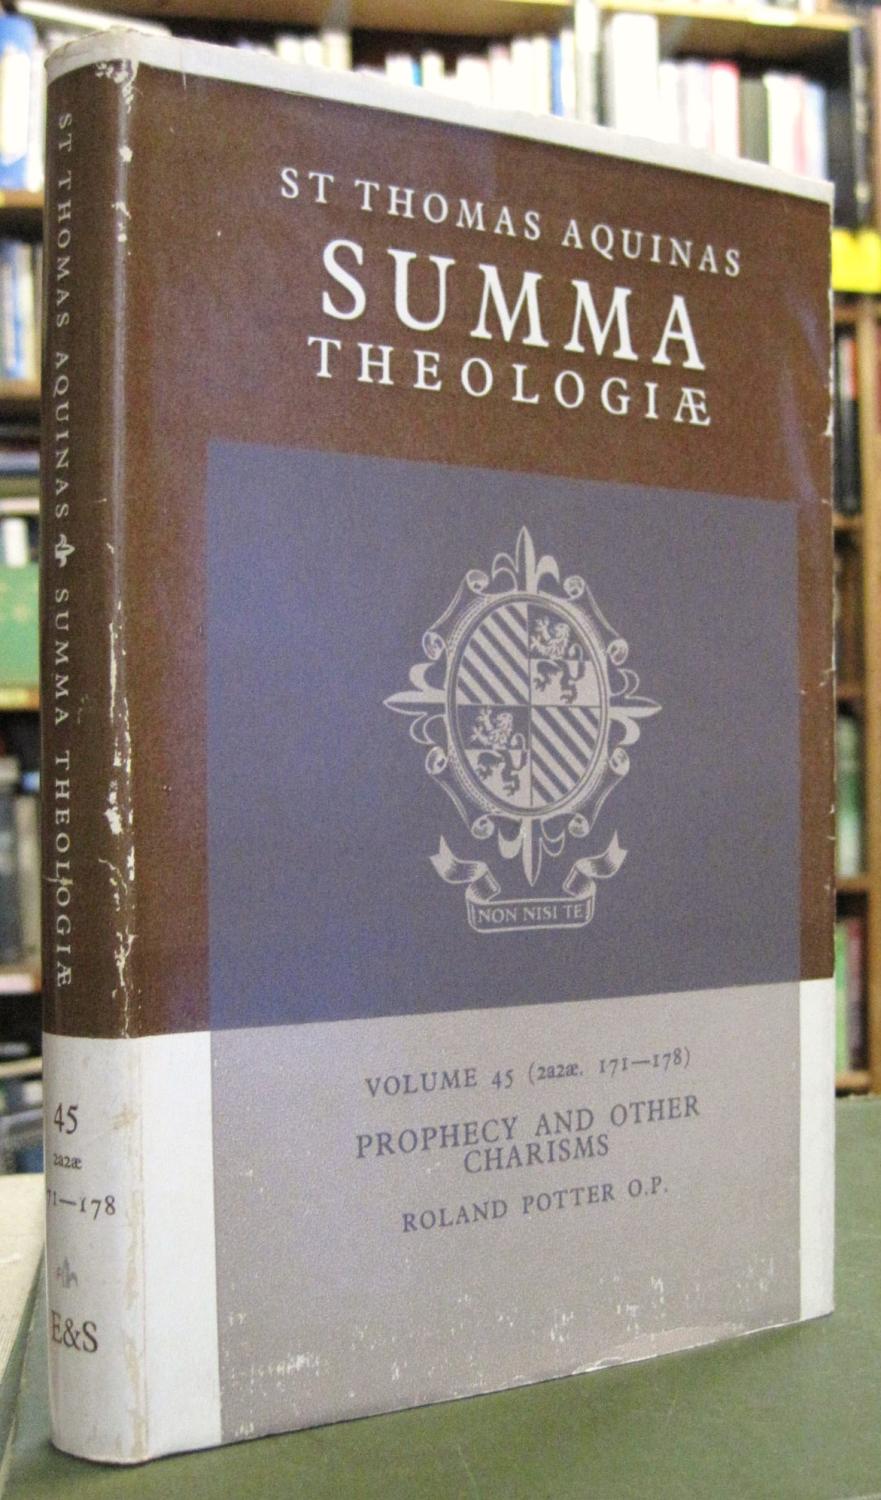 Summa Theologiae. Volume 45 Prophecy and other Charisms (2a2ae. 171-8) - Aquinas, St. Thomas (edited by Roland Potter O.P.)